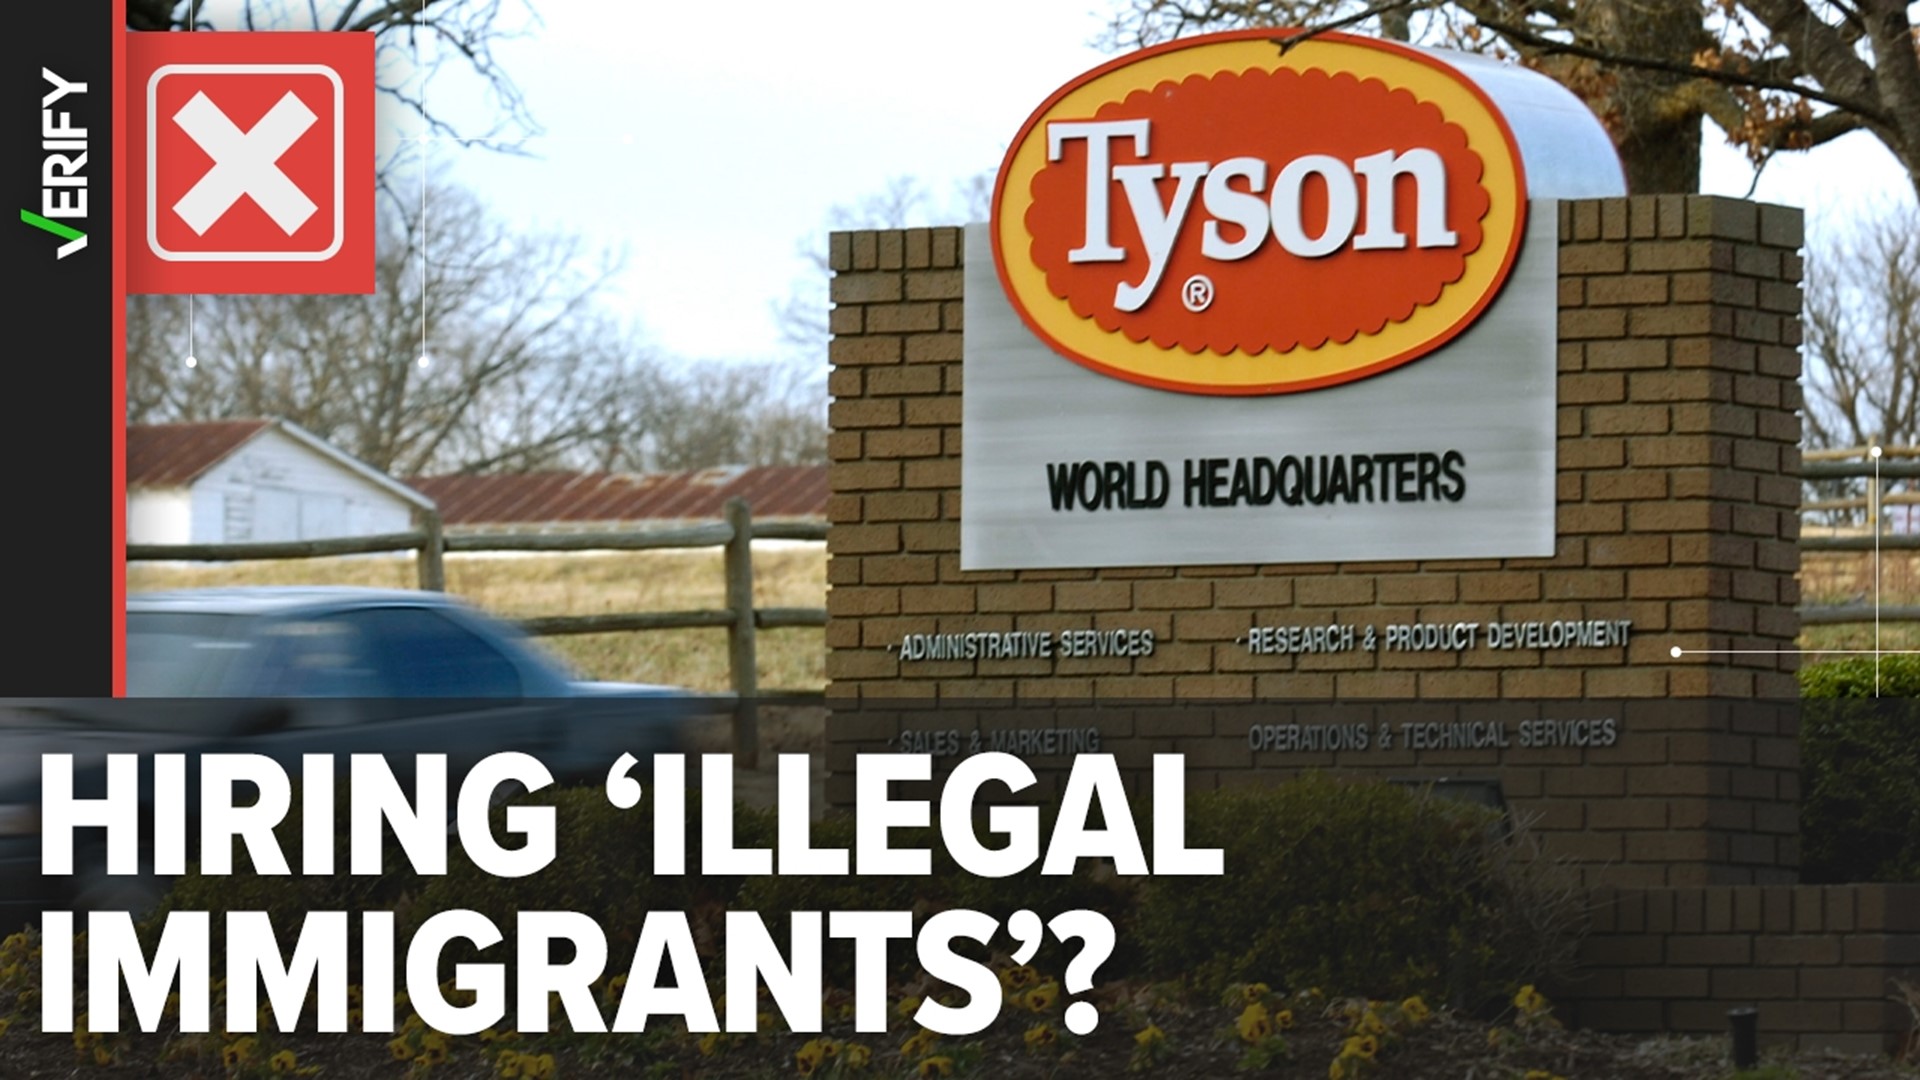 People online are calling for a boycott of Tyson Foods brands over claims that it is hiring “illegal immigrants” in the midst of layoffs. But those claims are false.